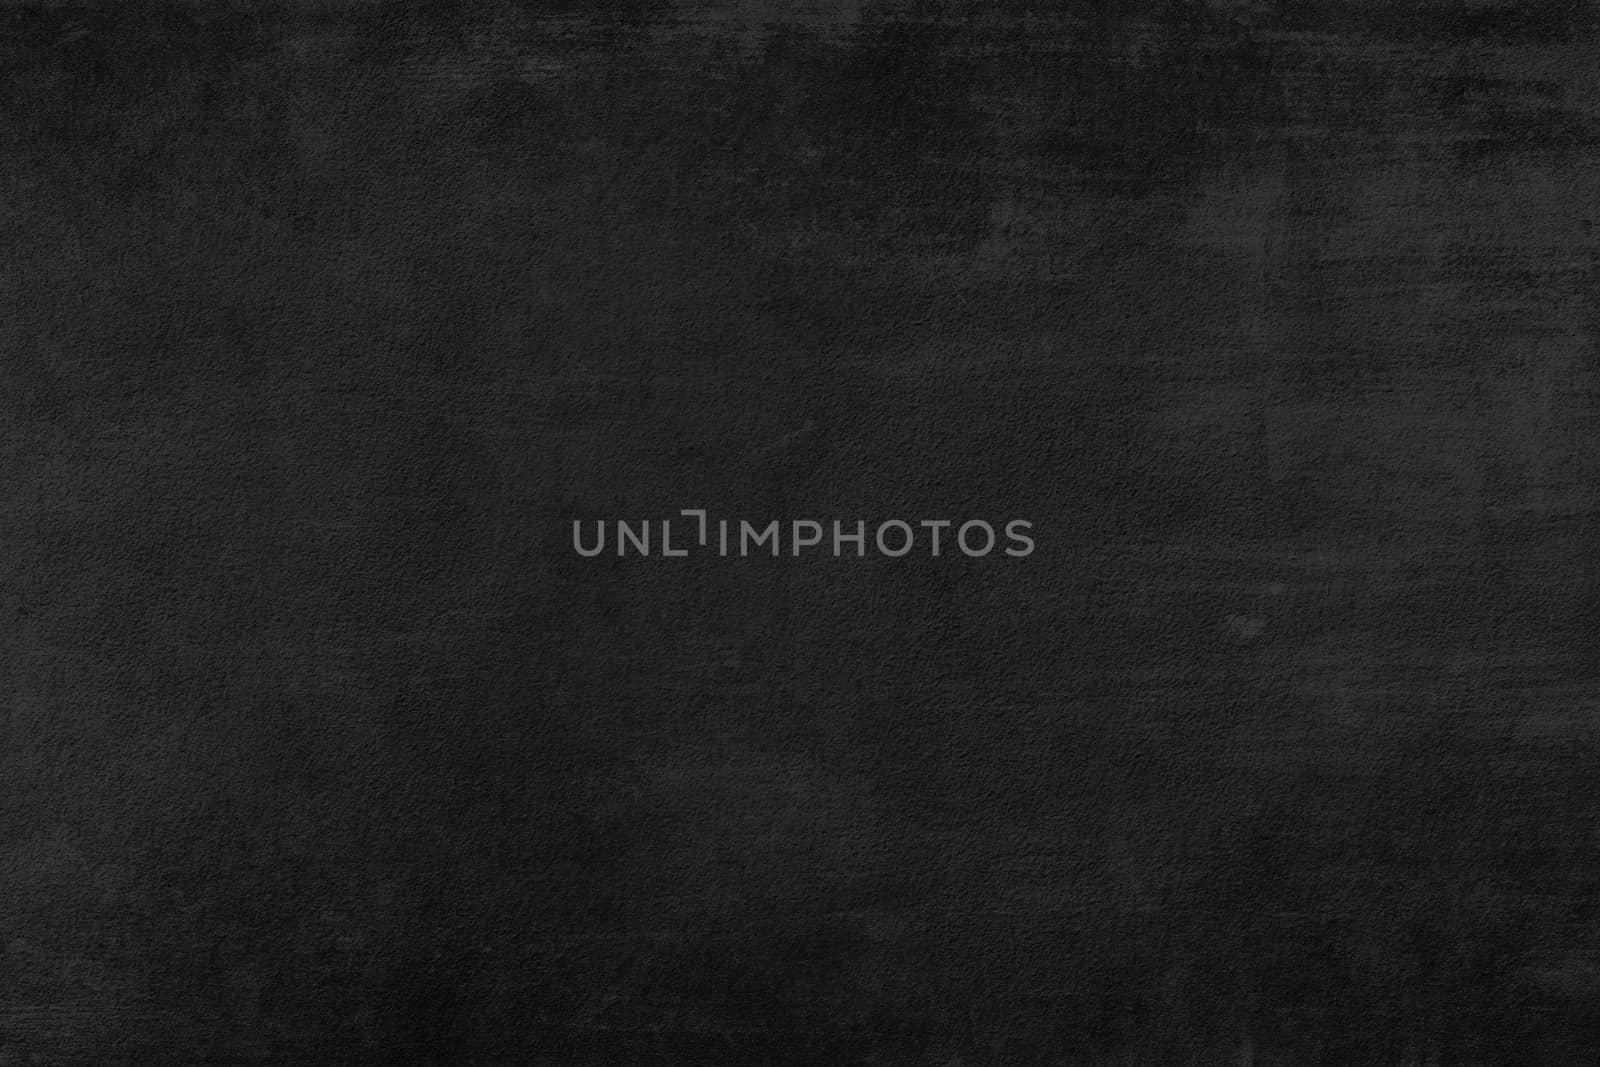 Abstract Black grunge texture background, Old vintage background with a glowing center and grunge